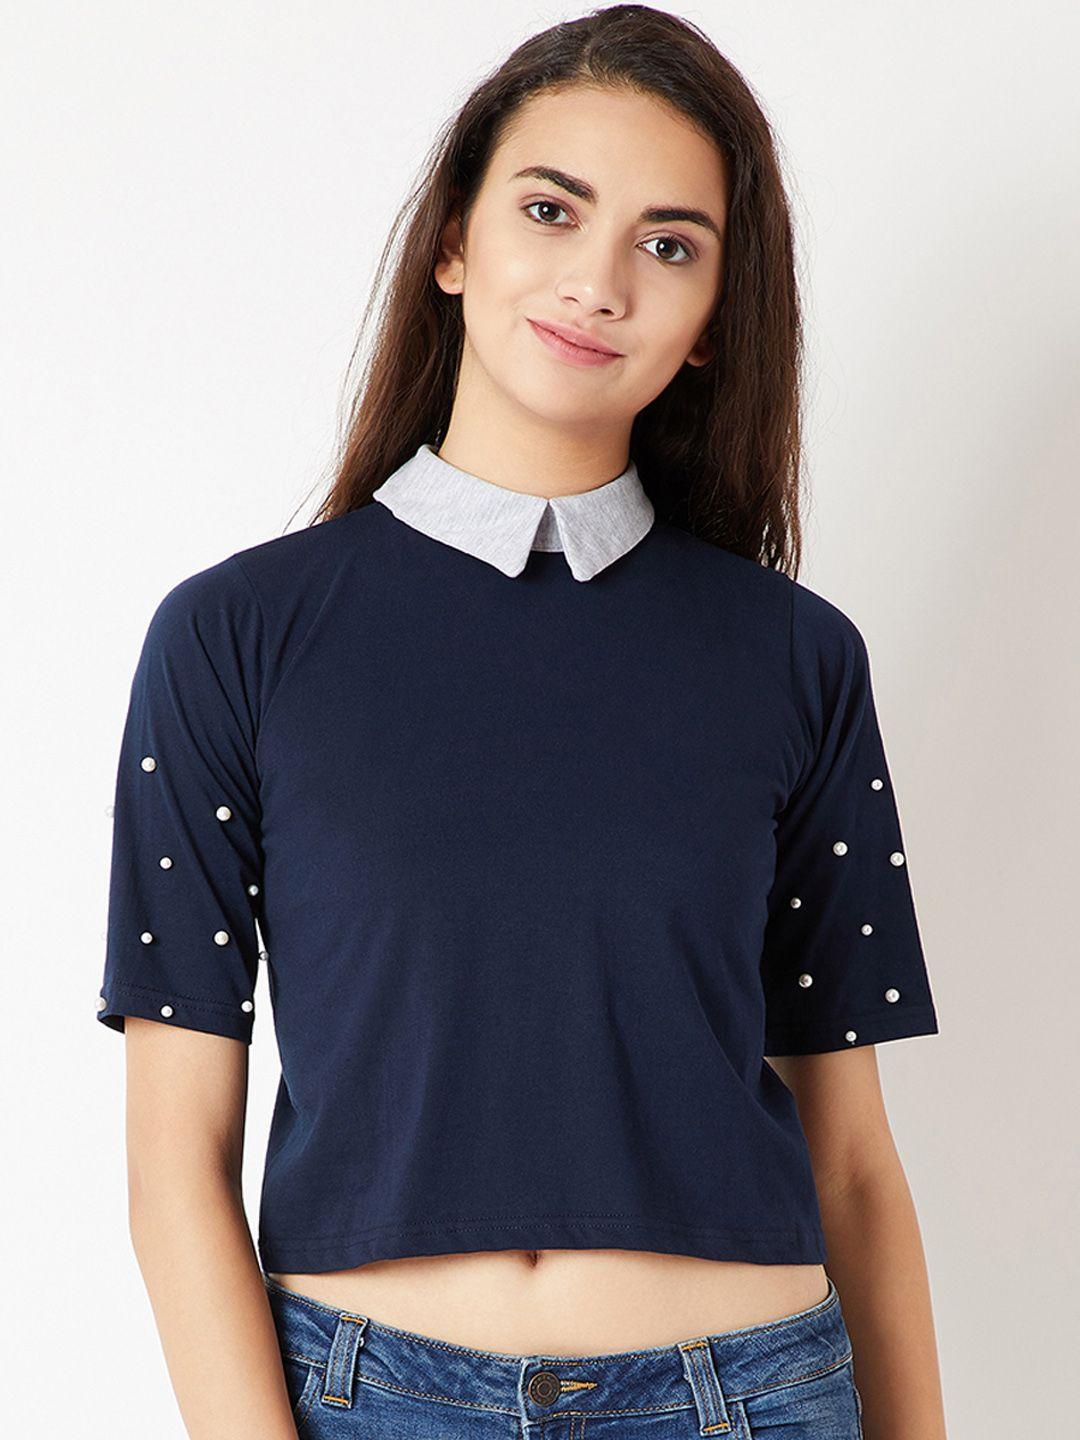 miss chase women navy blue embellished shirt style pure cotton top